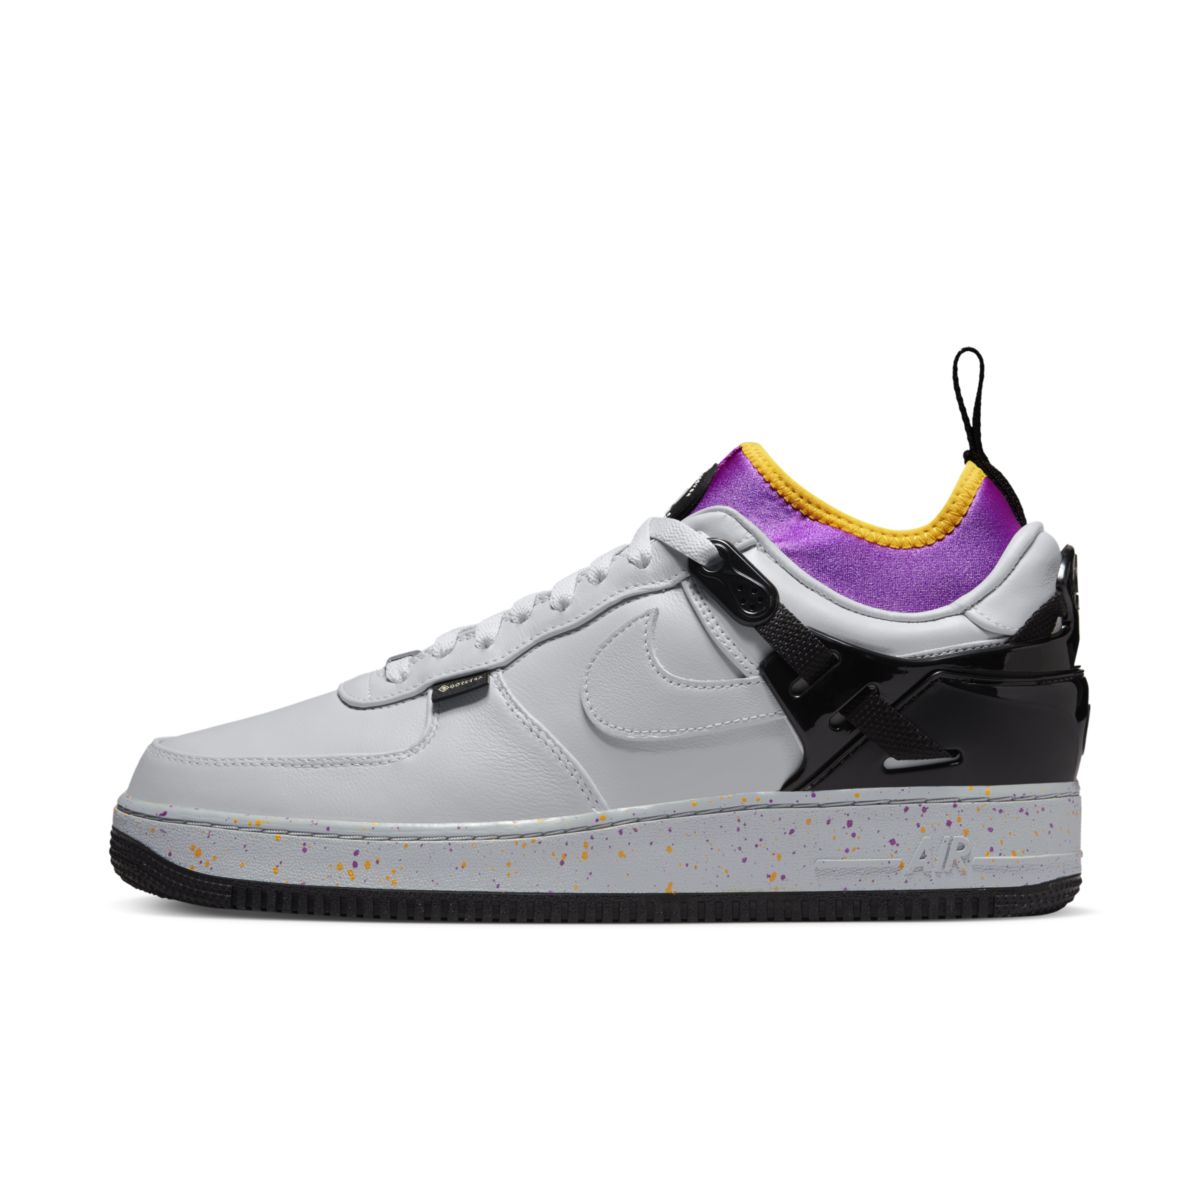 Undercover x Nike Air Force 1 Low Grey Fog DQ7558-001 2